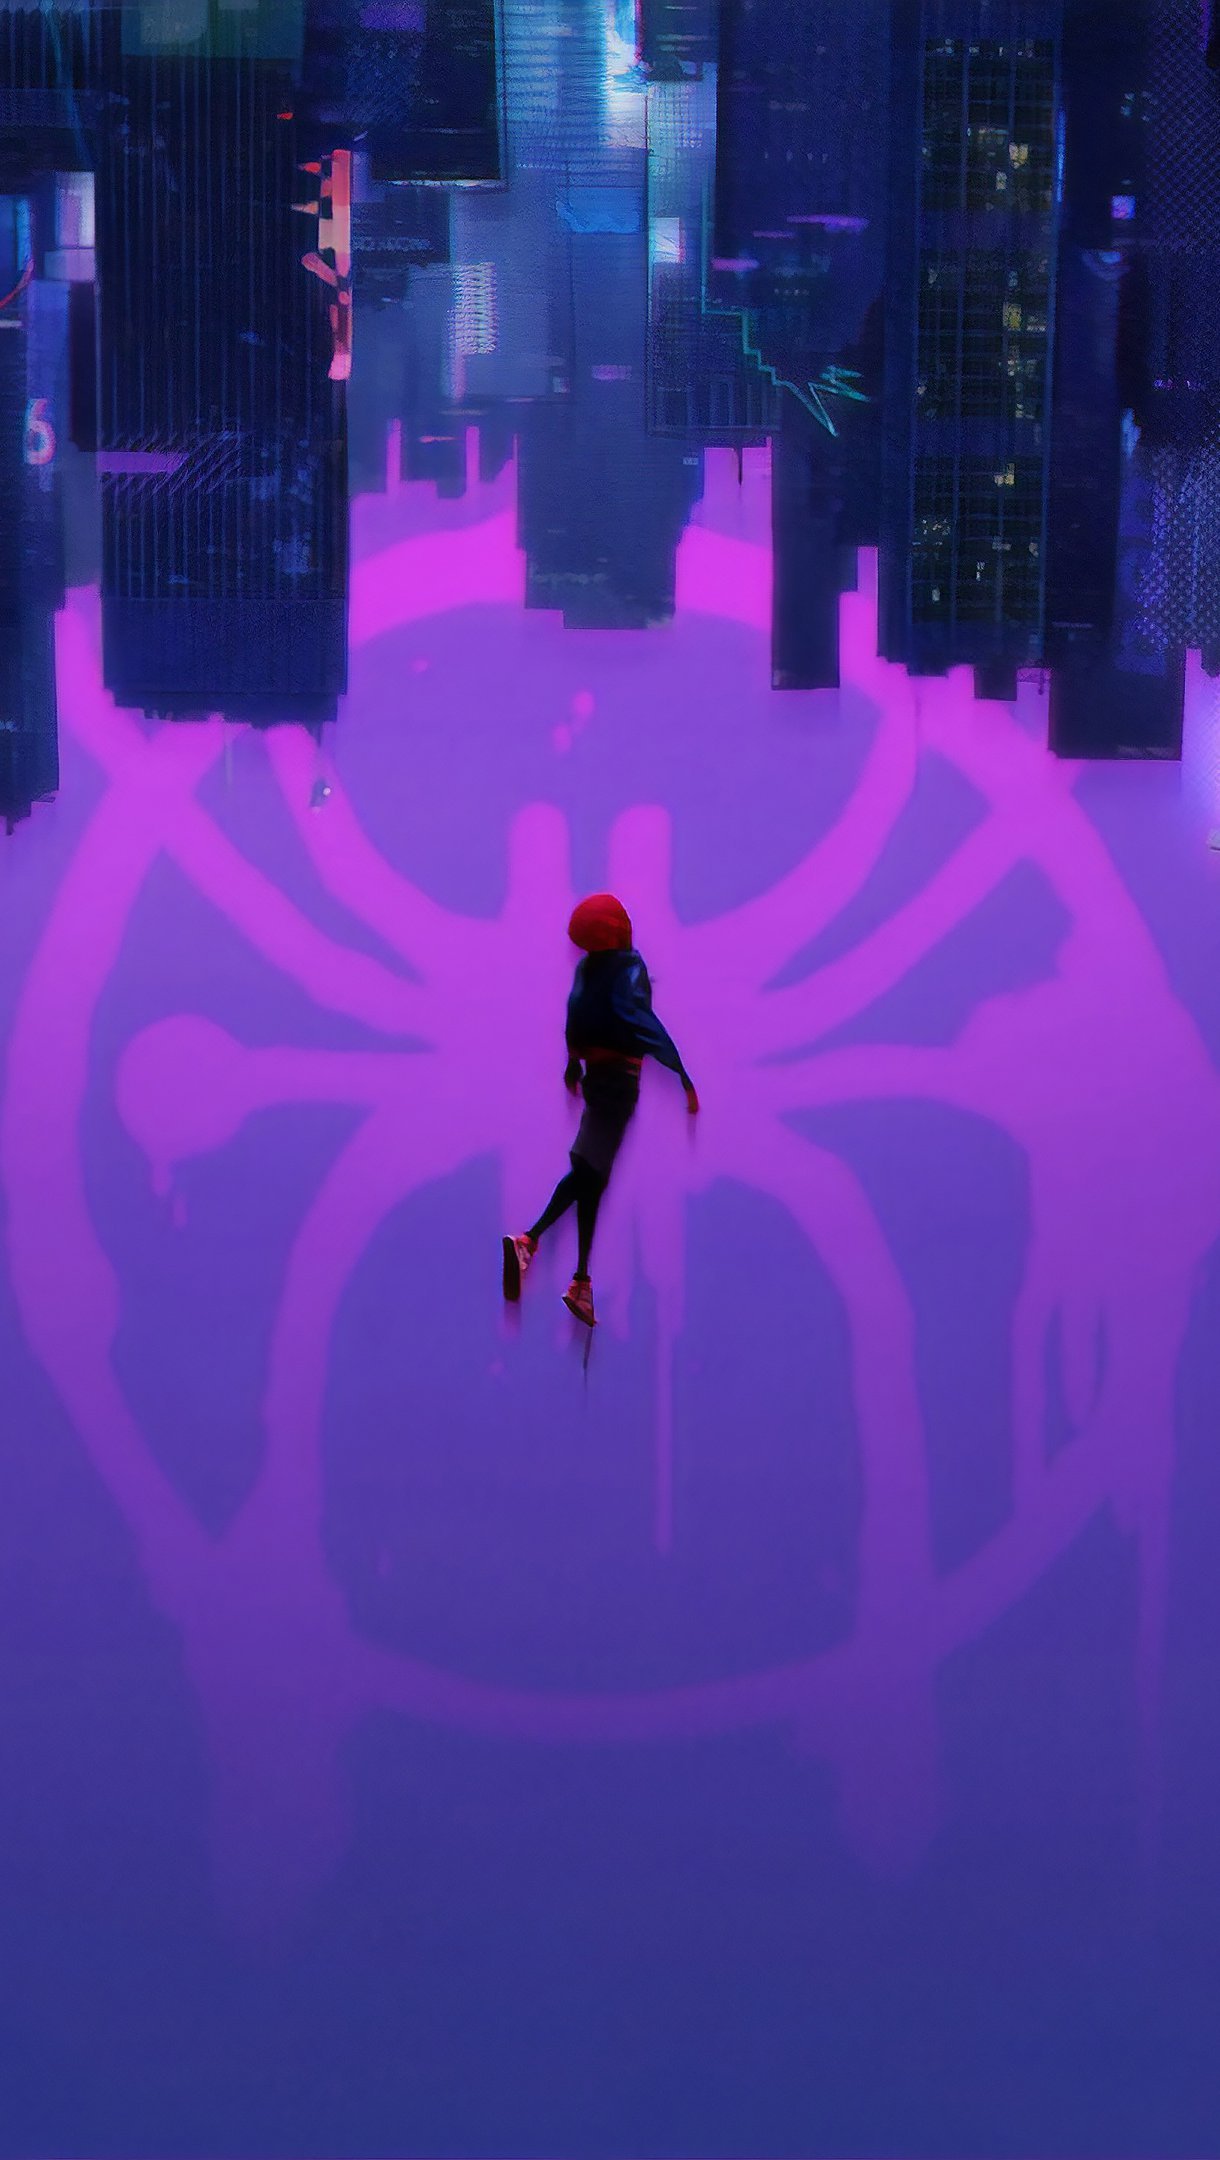 Spider-Man: Into the Spider-Verse Wallpaper 4k Ultra HD ID:3487